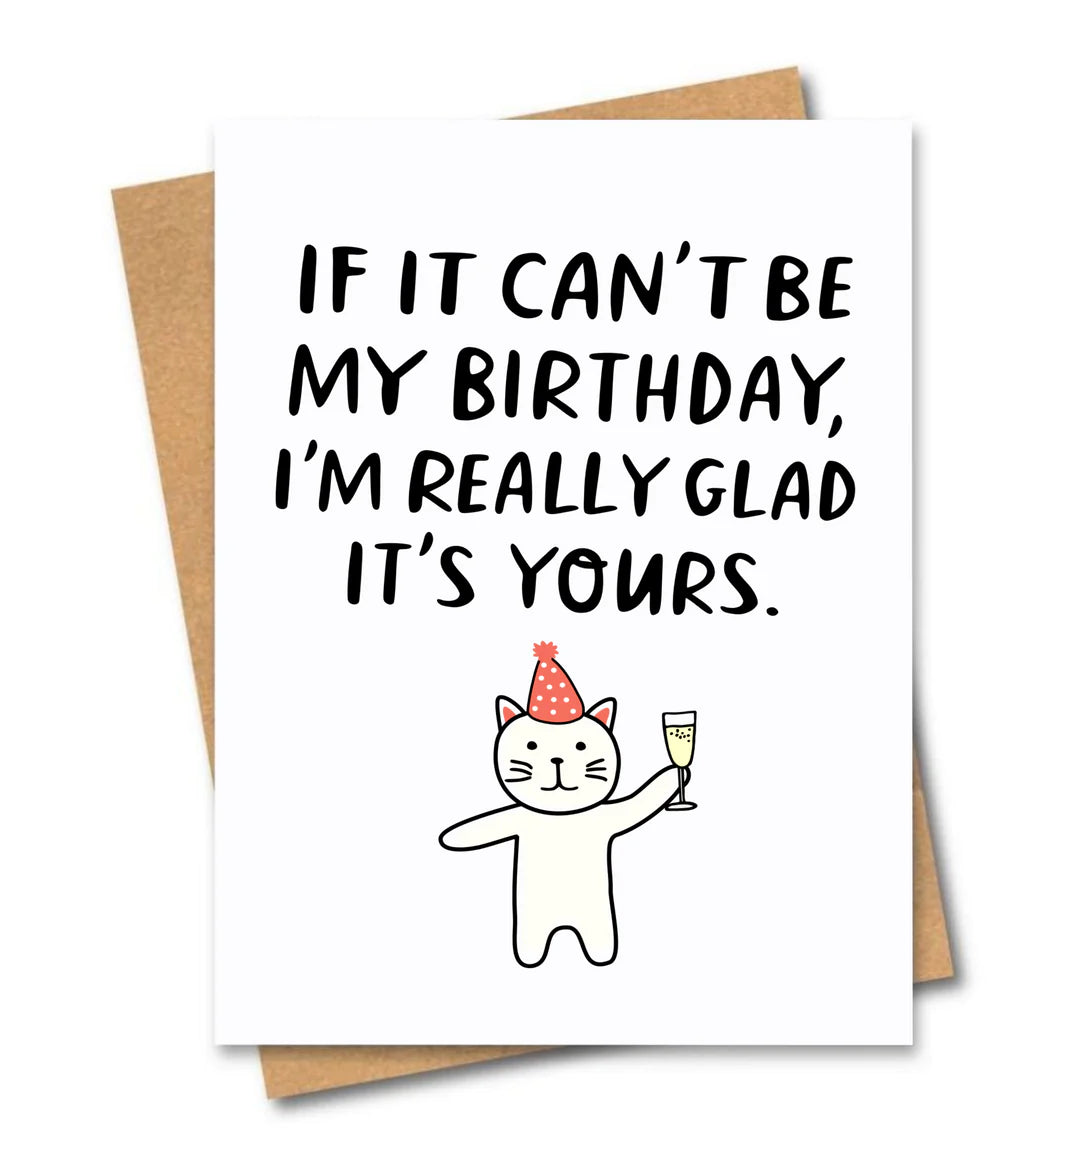 IF IT CAN'T BE MY BIRTHDAY CARD